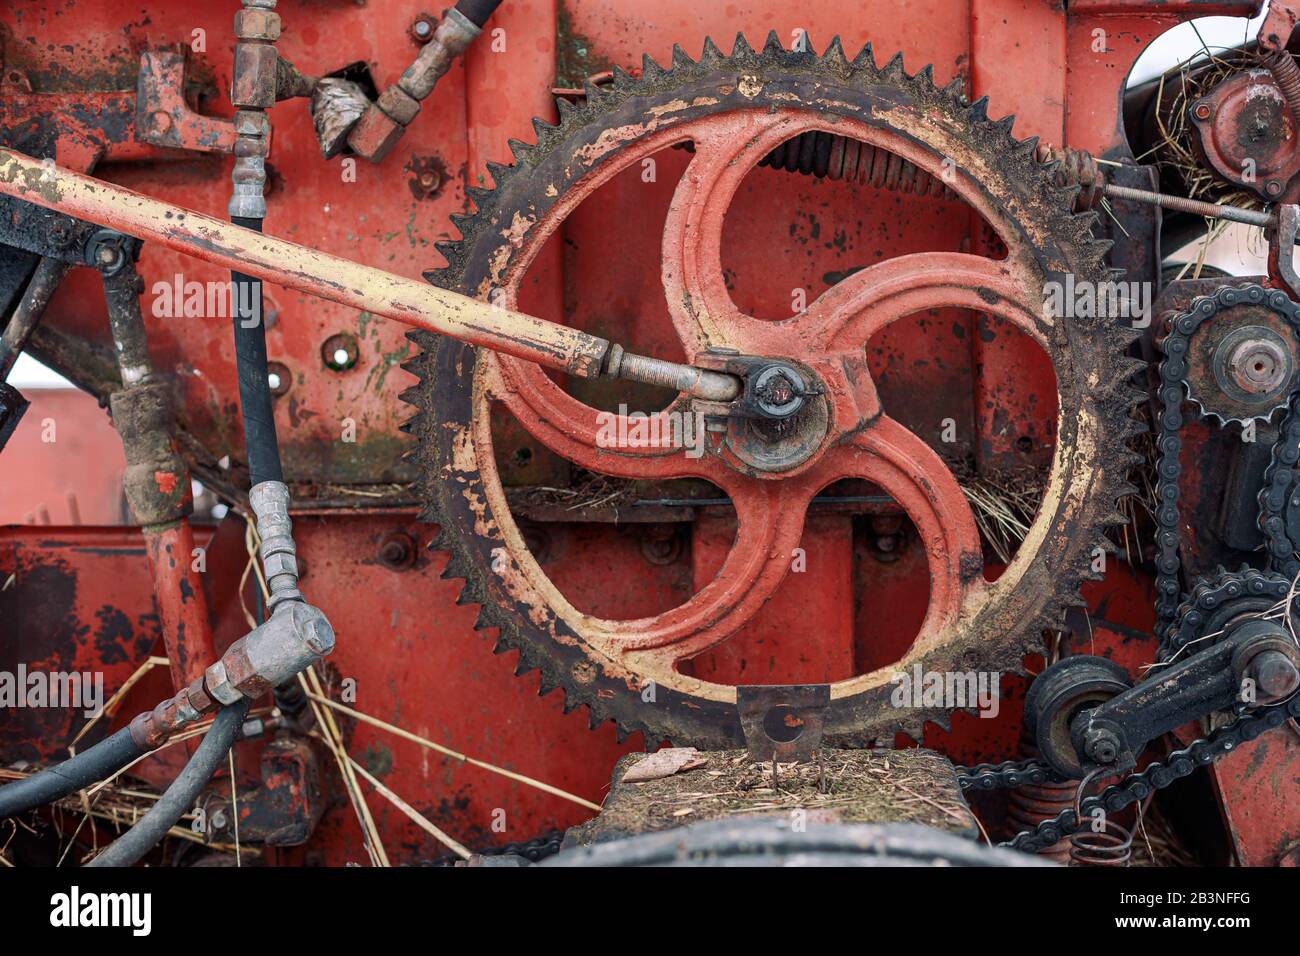 Old rusty farm equipment agricultural combine mechanism Stock Photo